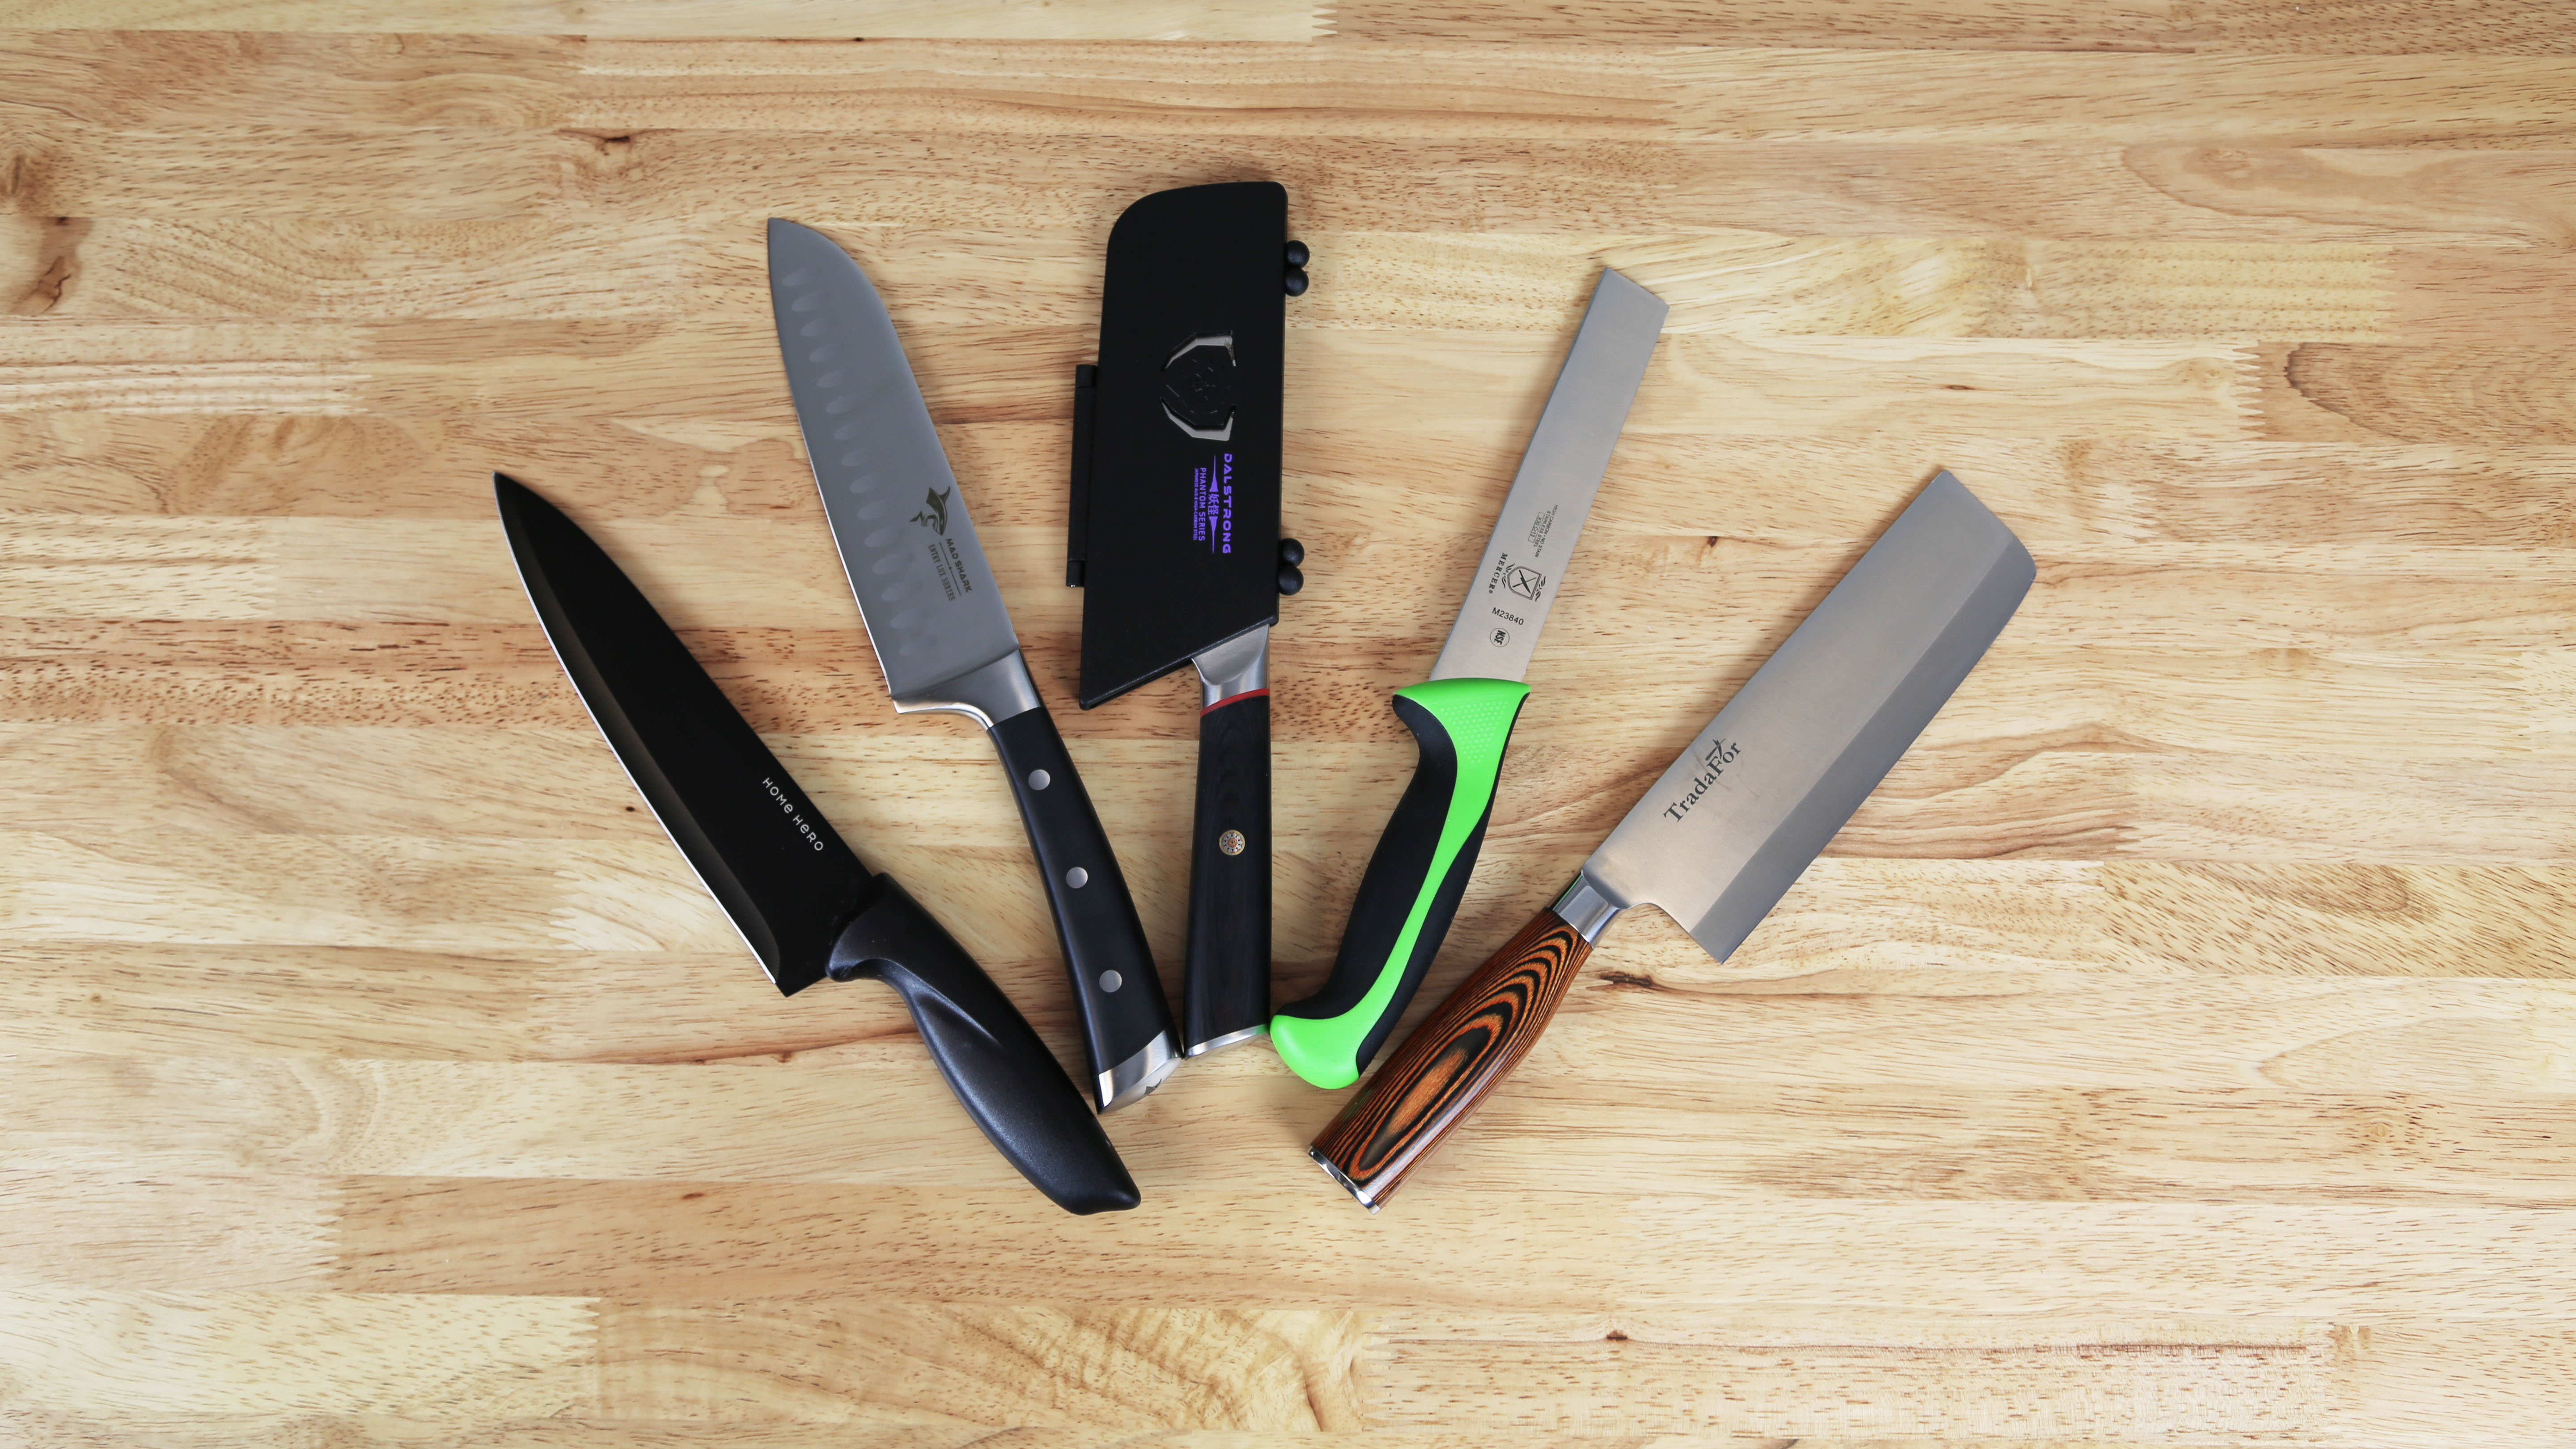 The Best Vegetable Knife  Reviews, Ratings, Comparisons